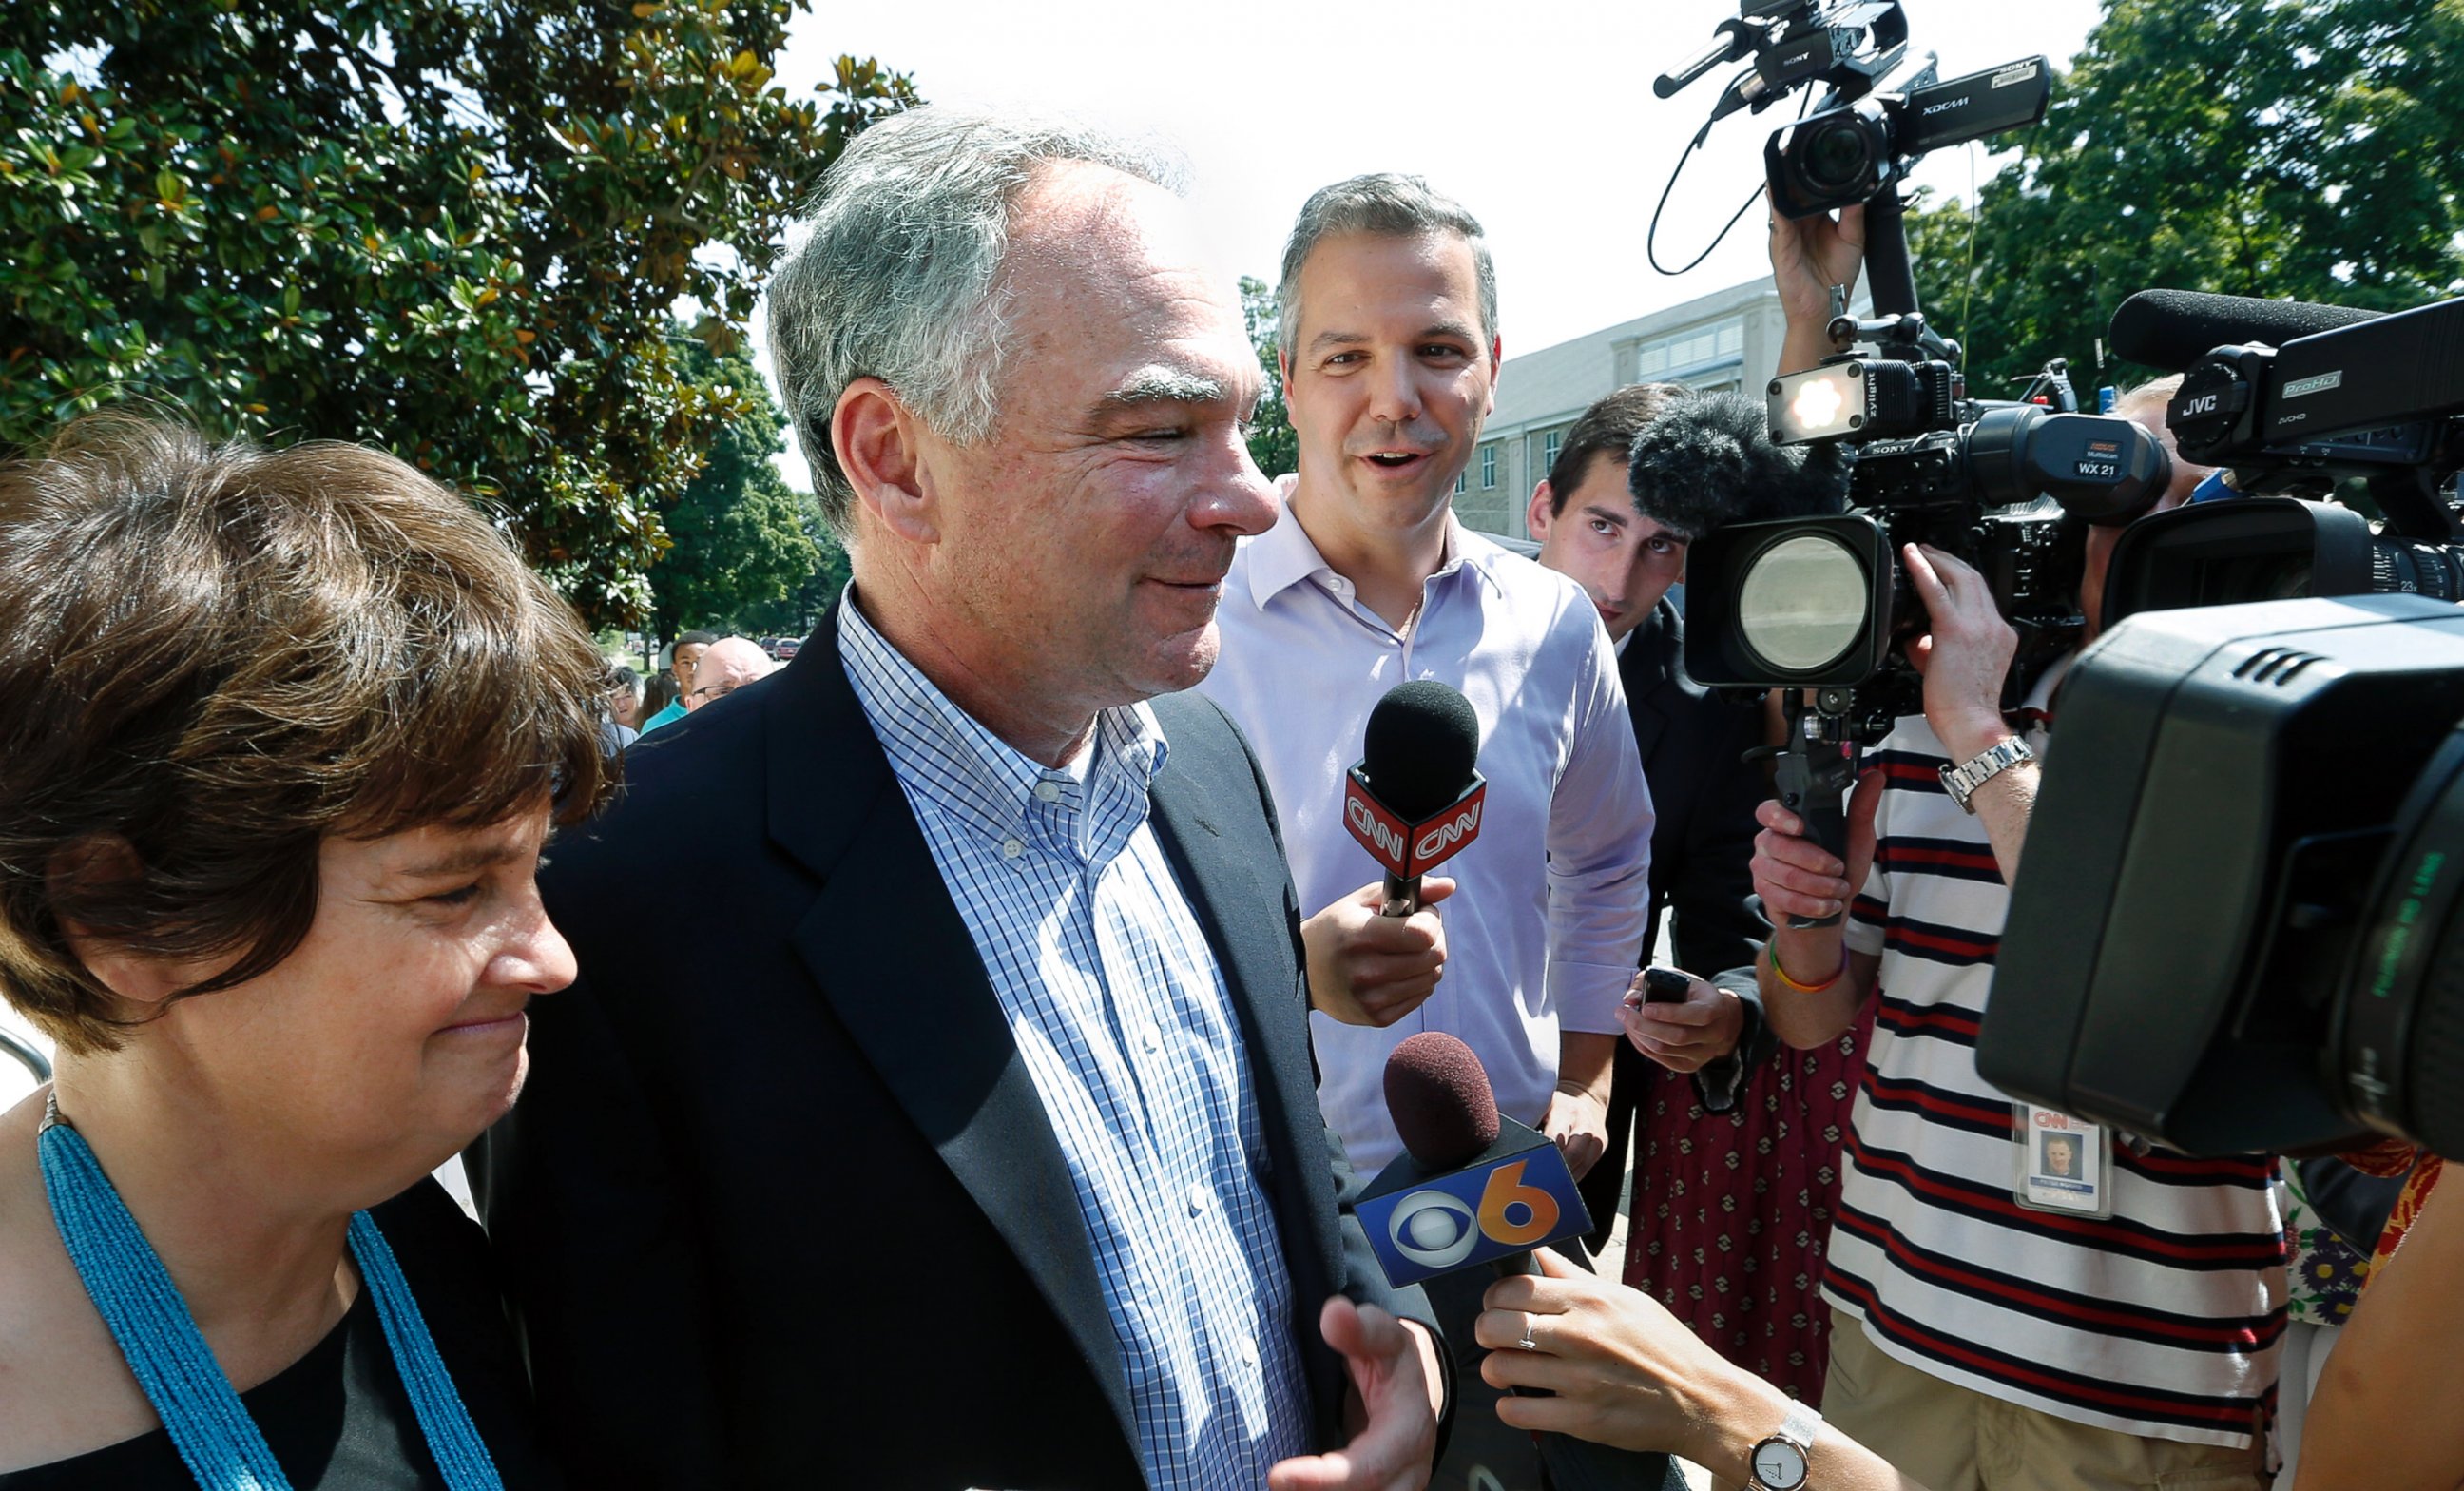 PHOTO: Senator Tim Kaine, center, with his wife Anne Holton, answers questions after attending Mass at their church, St. Elizabeth Catholic Church, in Richmond, Va., July 24, 2016.